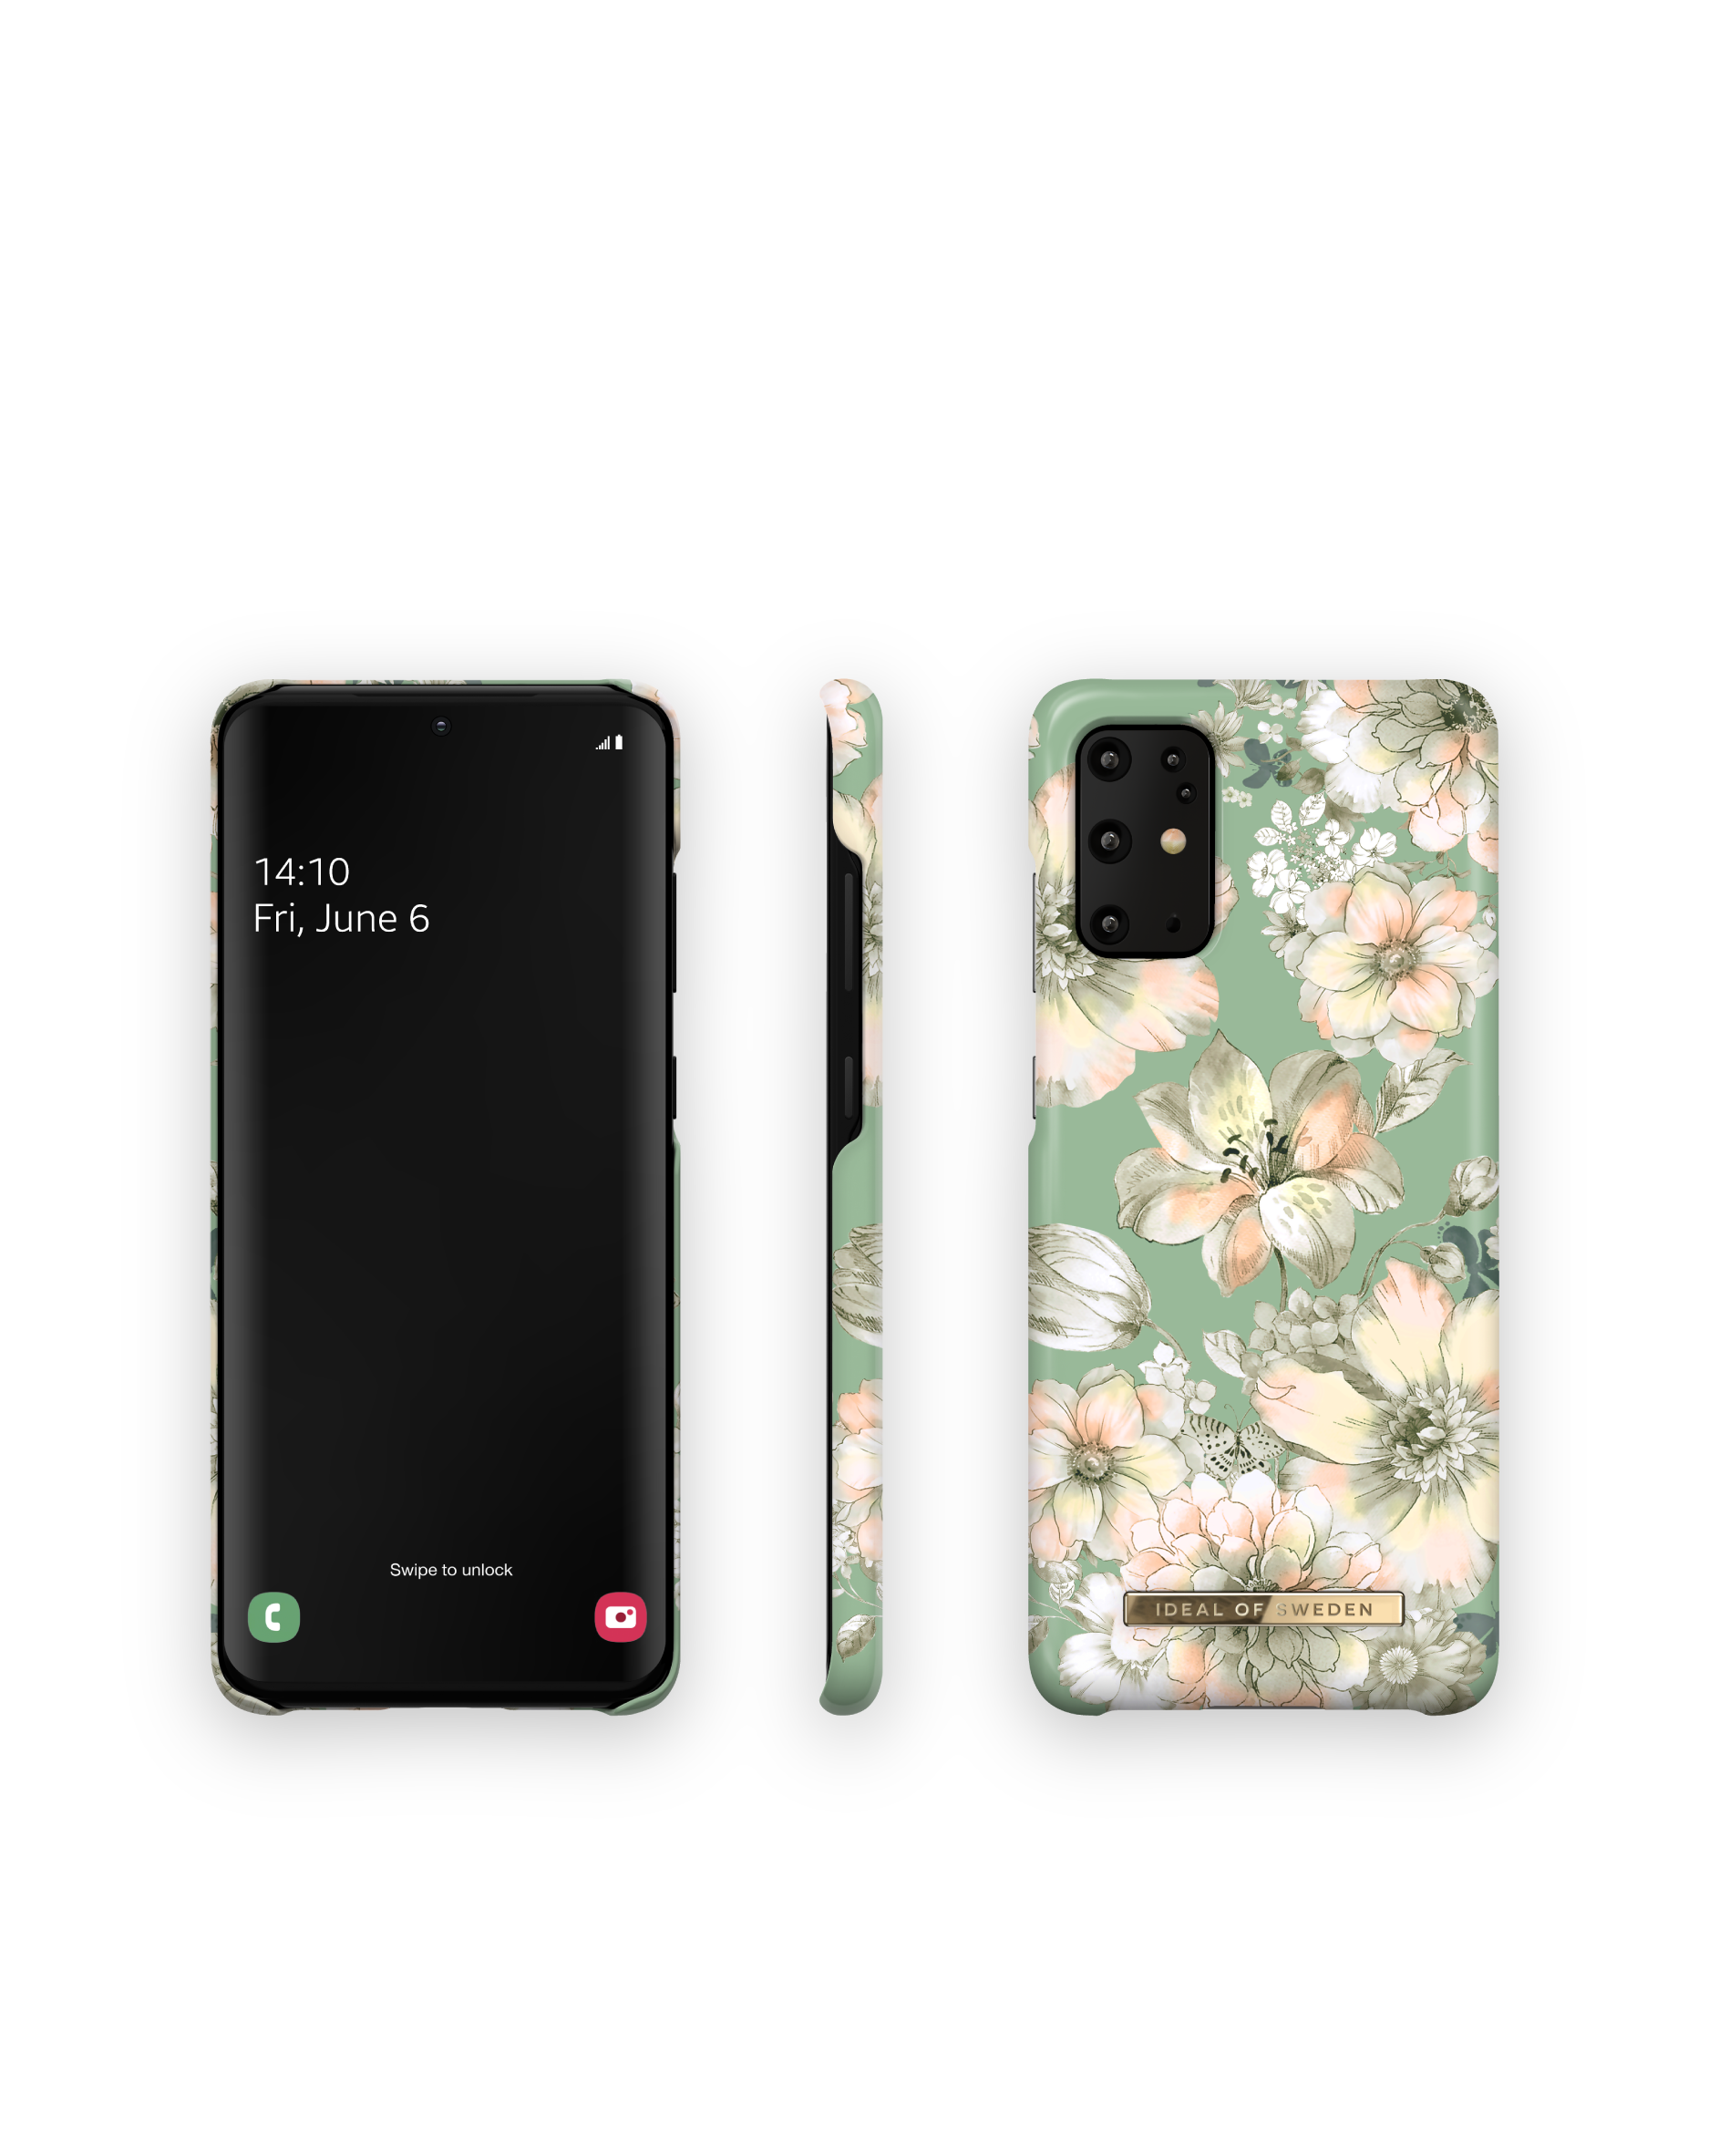 Bloom IDFCSS20-S11-197, Vintage S20+, Galaxy SWEDEN Backcover, OF Samsung, IDEAL